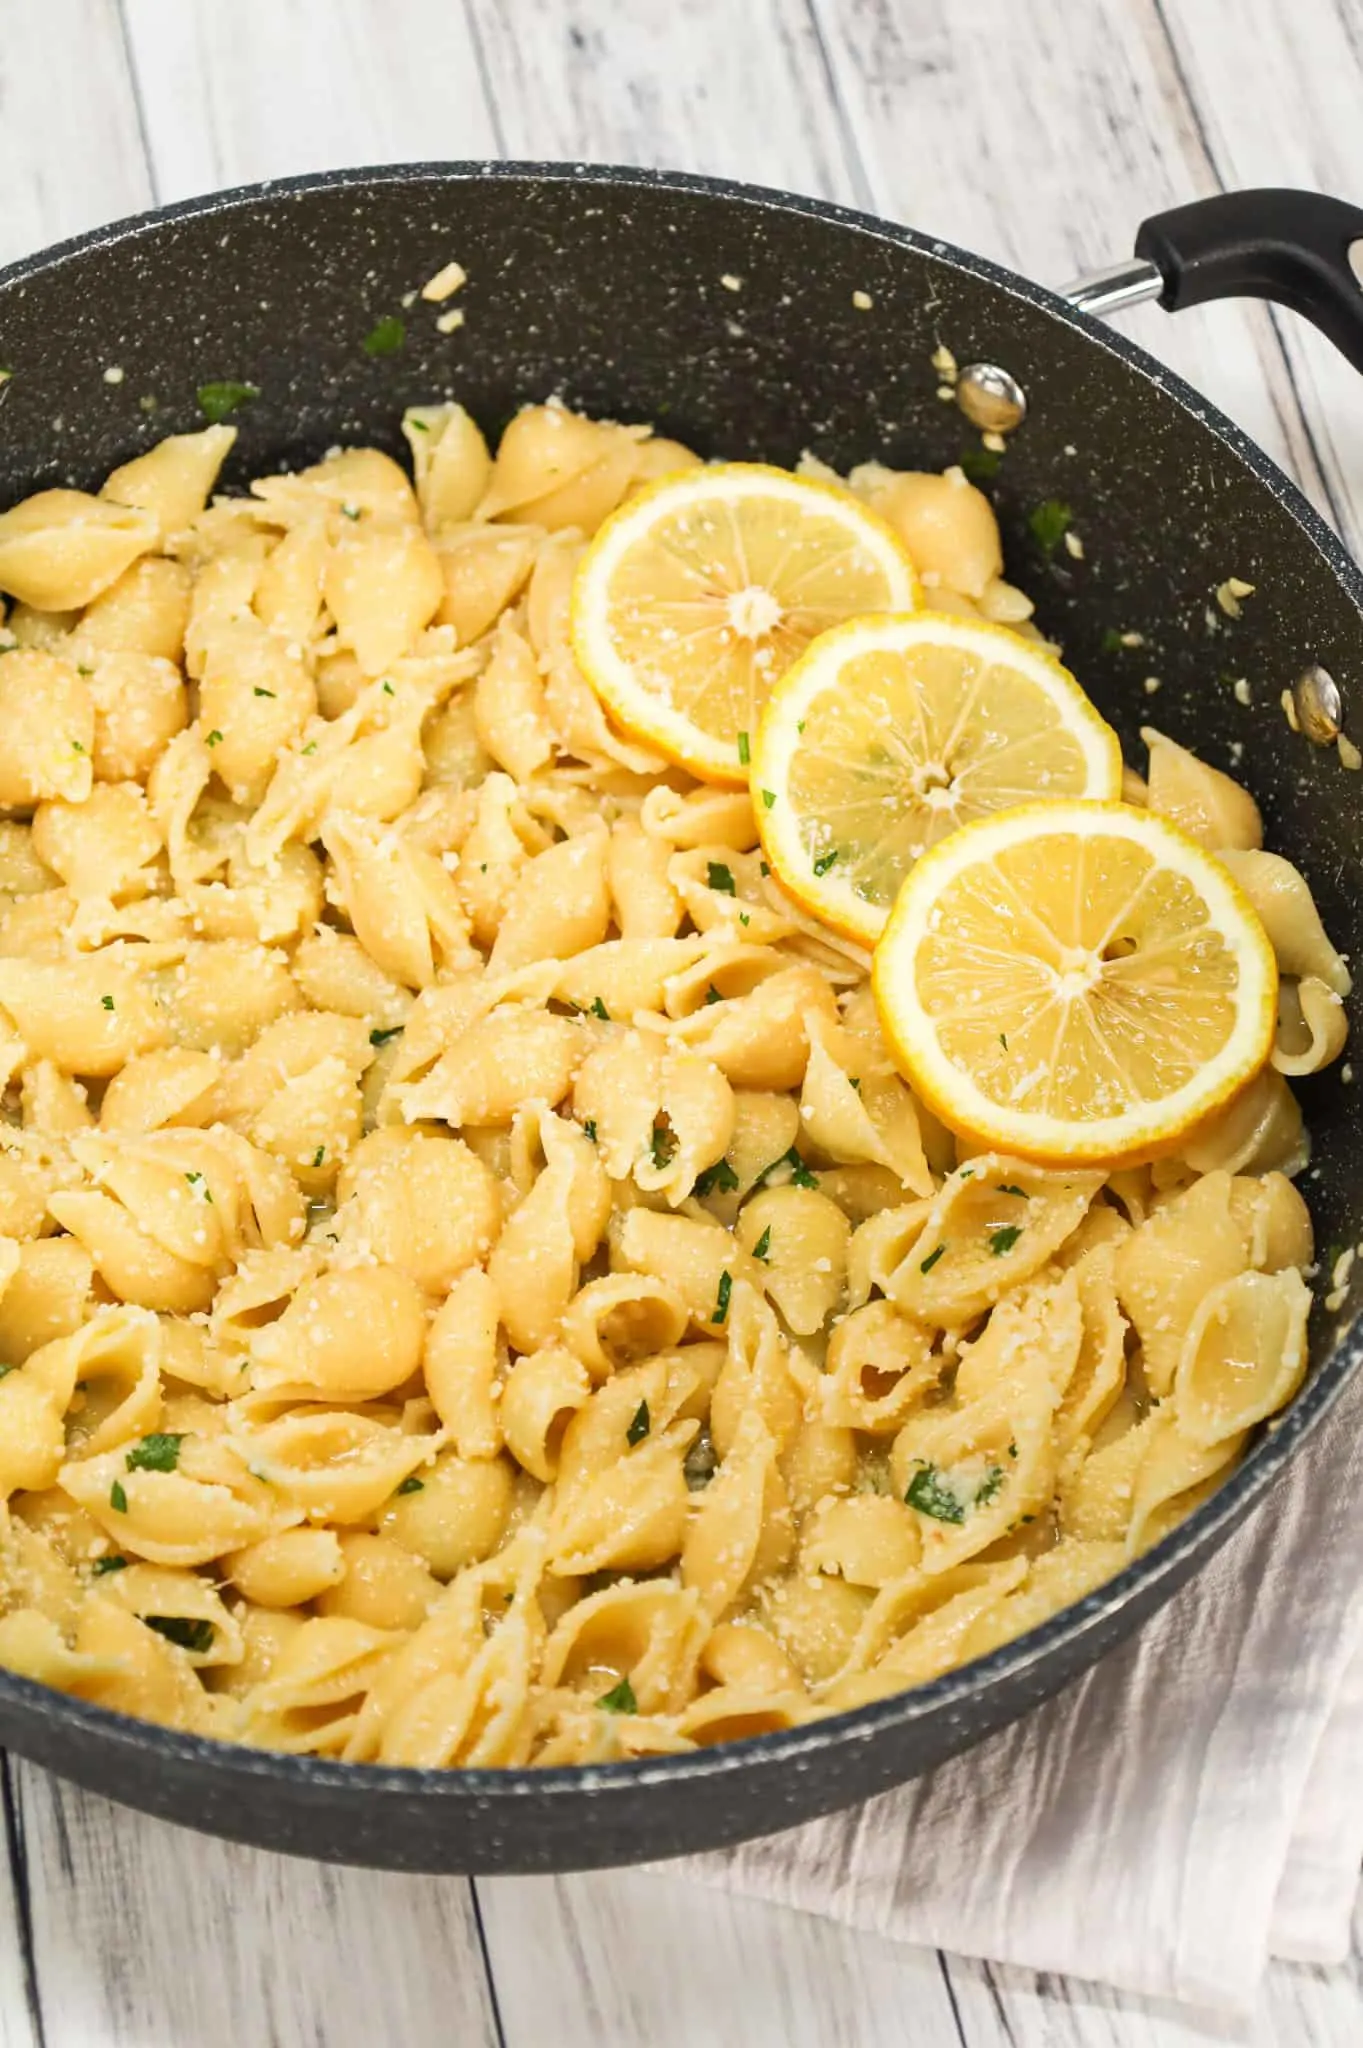 Lemon Garlic Pasta is a simple dinner recipe using shell pasta tossed in a lemon garlic butter sauce and topped with grated parmesan and chopped parsley.